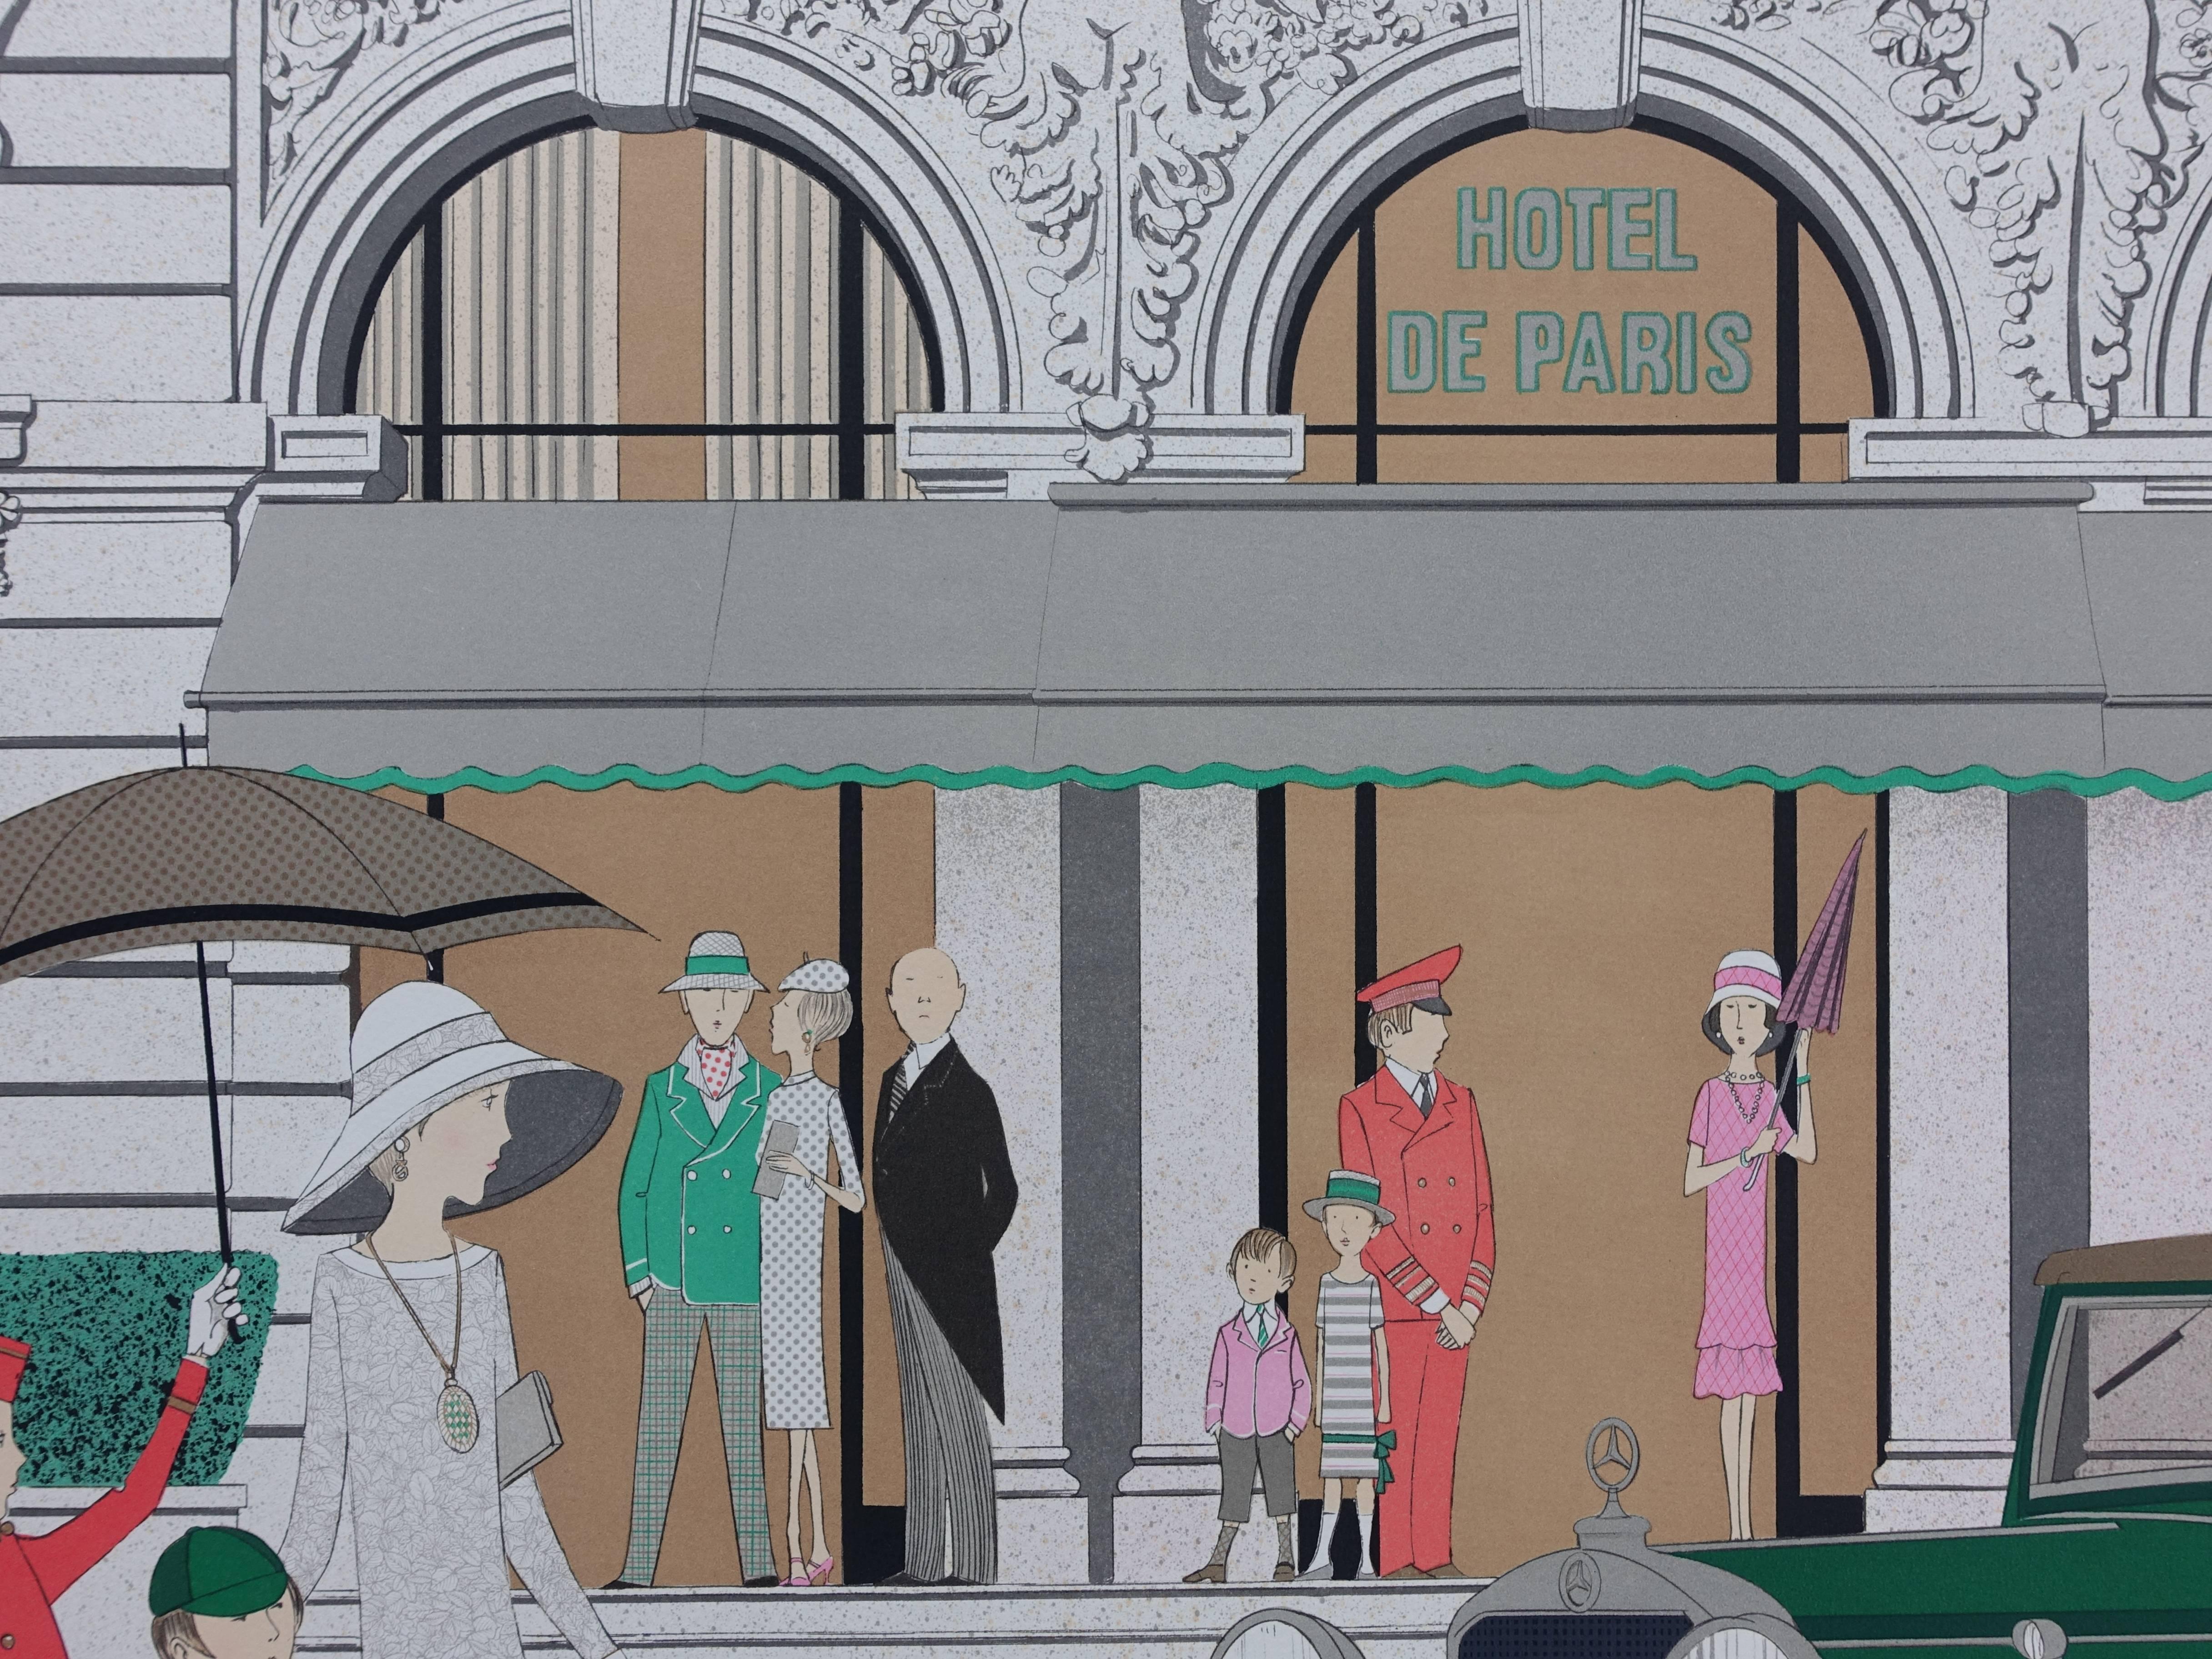 Denis-Paul NOYER
Hotel : Old Mercedes and Hotel de Paris

Original lithograph, c. 1980
Handsigned in pencil
Numbered / 115 copies
On Arches vellum 75 x 105 cm (c. 30 x 42 in)

INFORMATION : Hotel de Paris was a well known 5* hotel / palace located